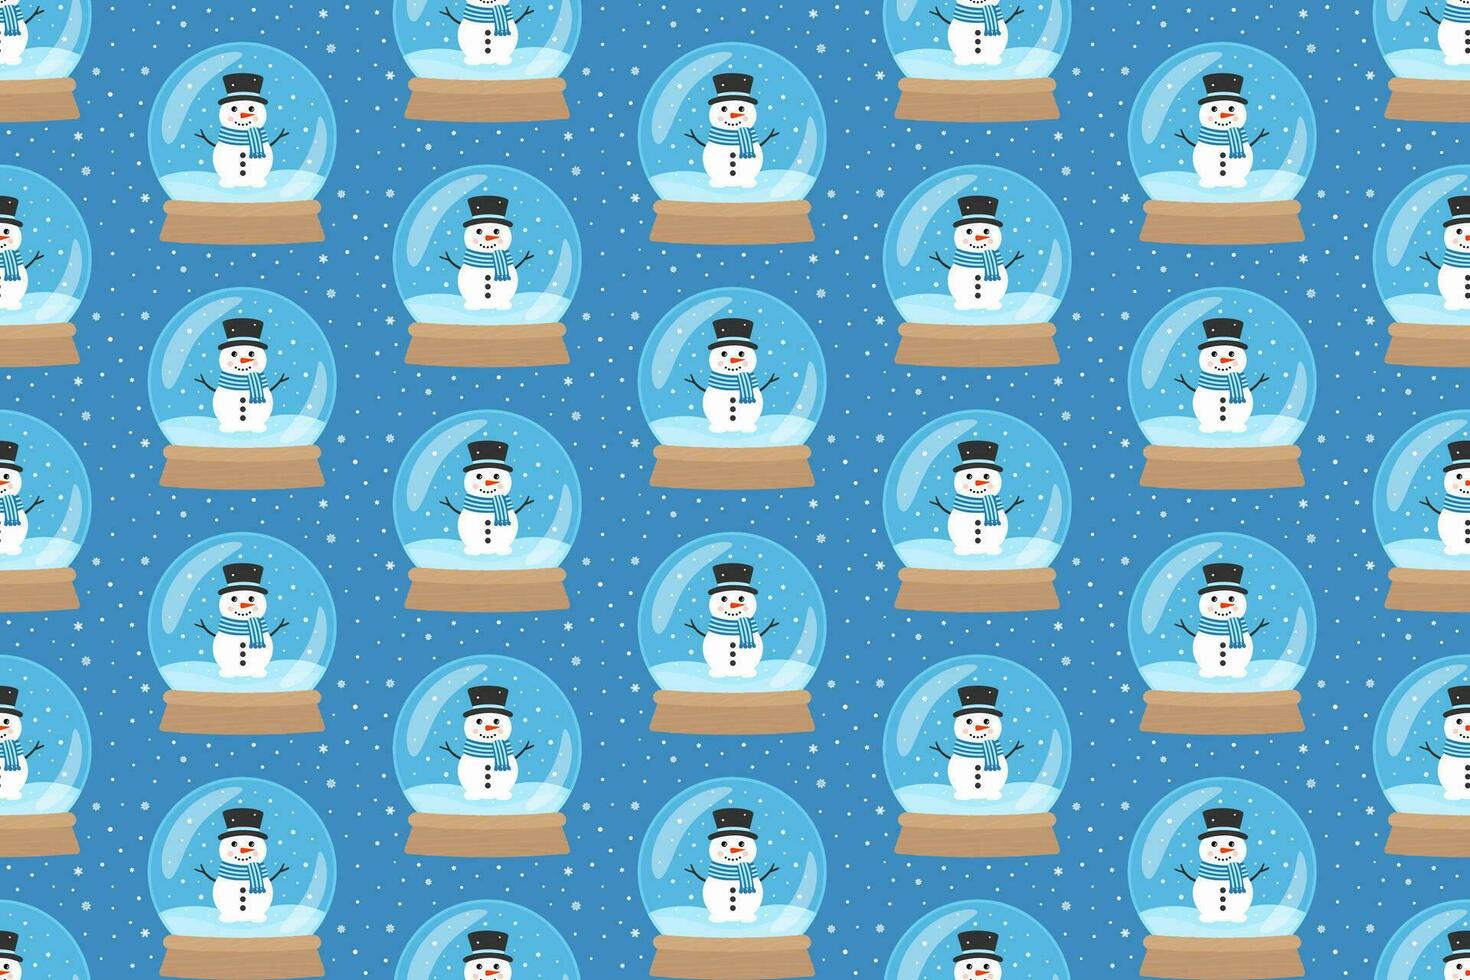 Snow Globe with Snowman. Vector Seamless Pattern on Blue Background. Christmas and New Year Design